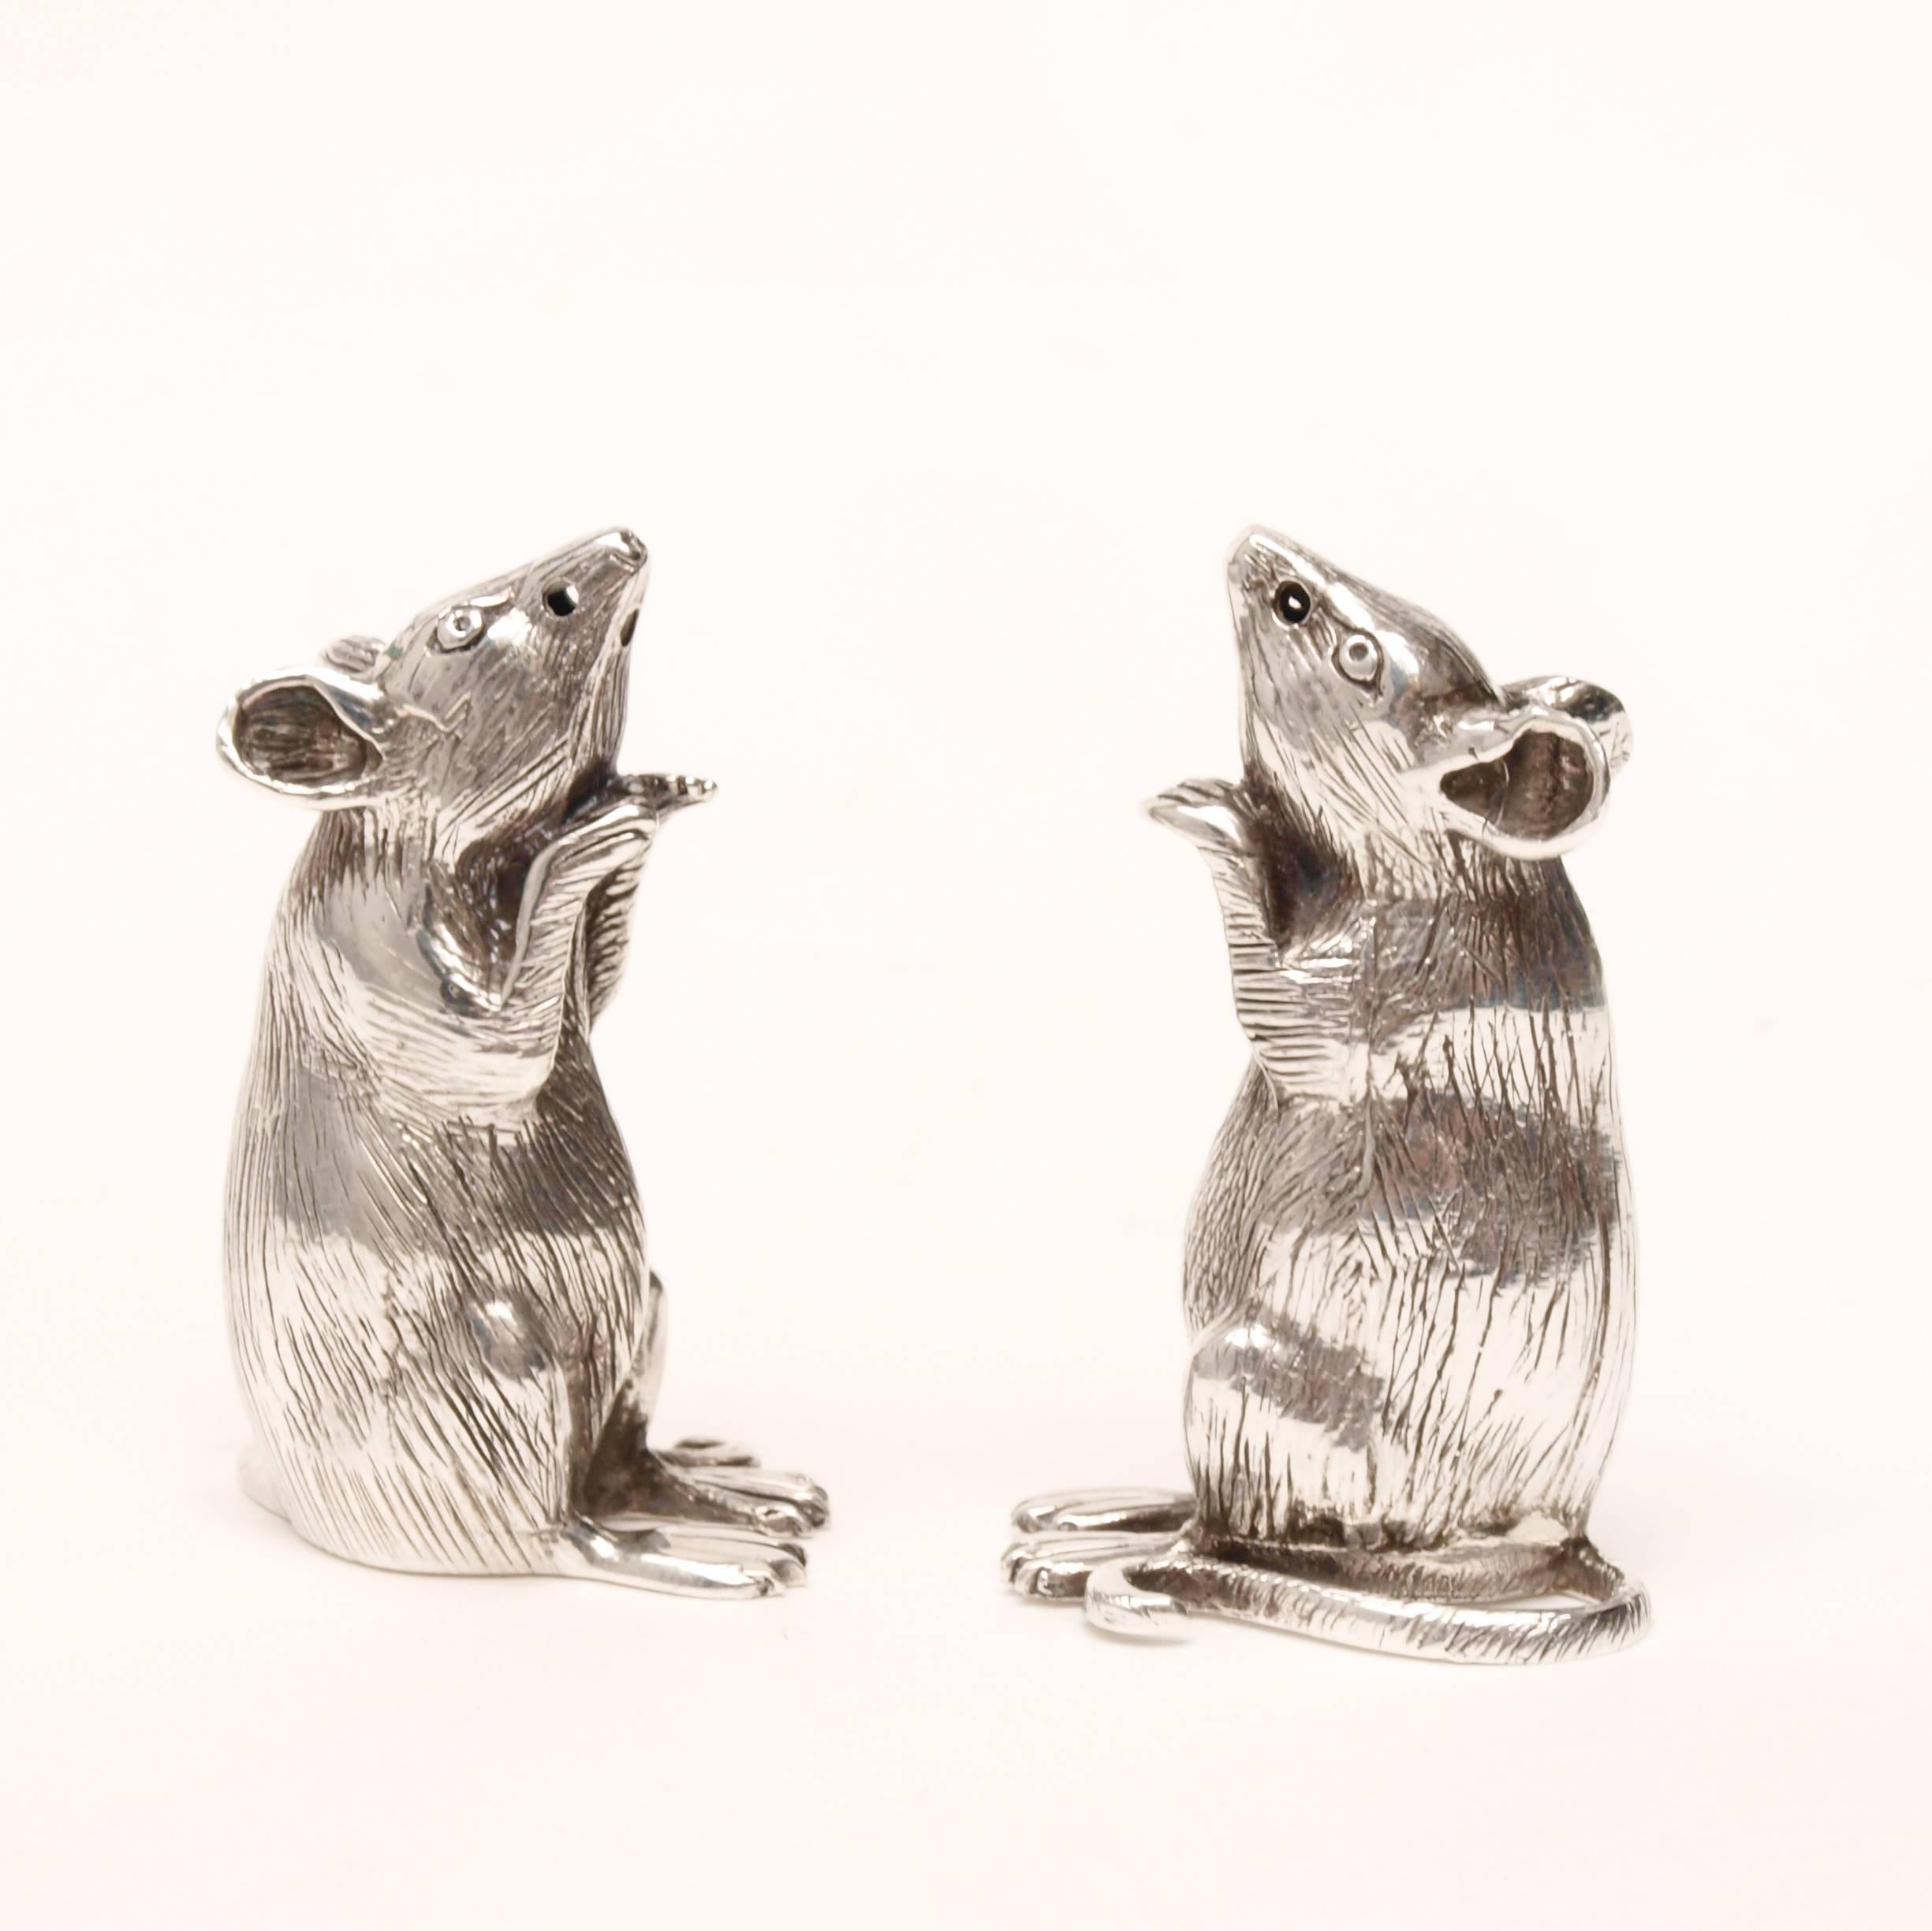 A pair of charming sterling silver mice, salt and pepper pots from the early 20th century. Hallmarked ‘925’ and ‘Sterling’ to their feet, with one other indistinguishable makers mark. Attributed to Francis Howard.